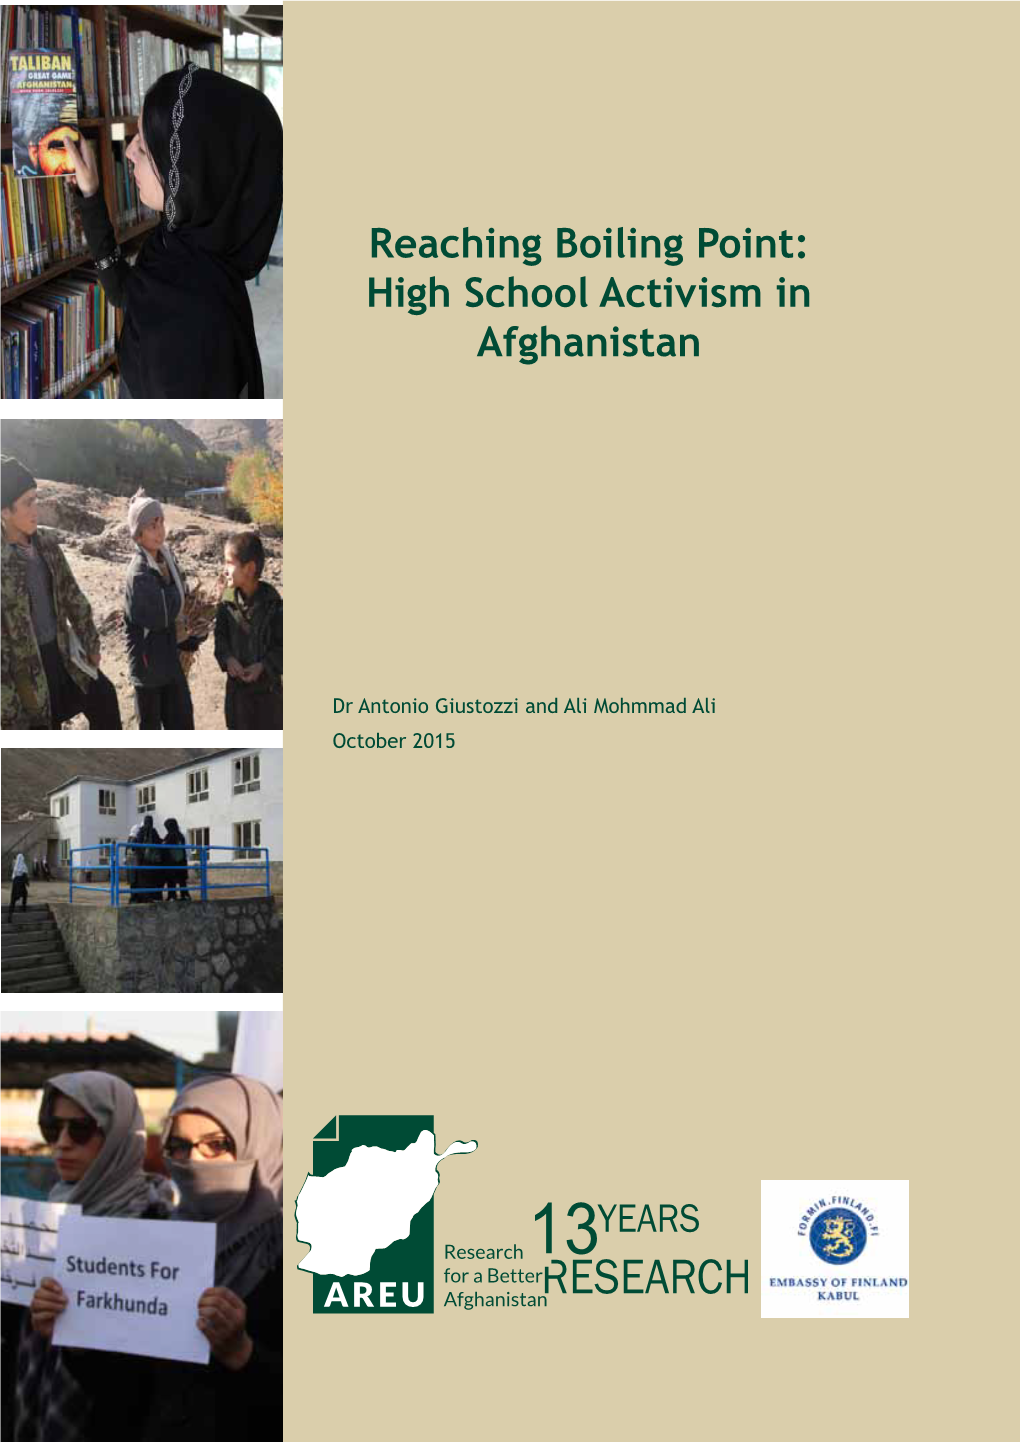 Reaching Boiling Point: High School Activism in Afghanistan